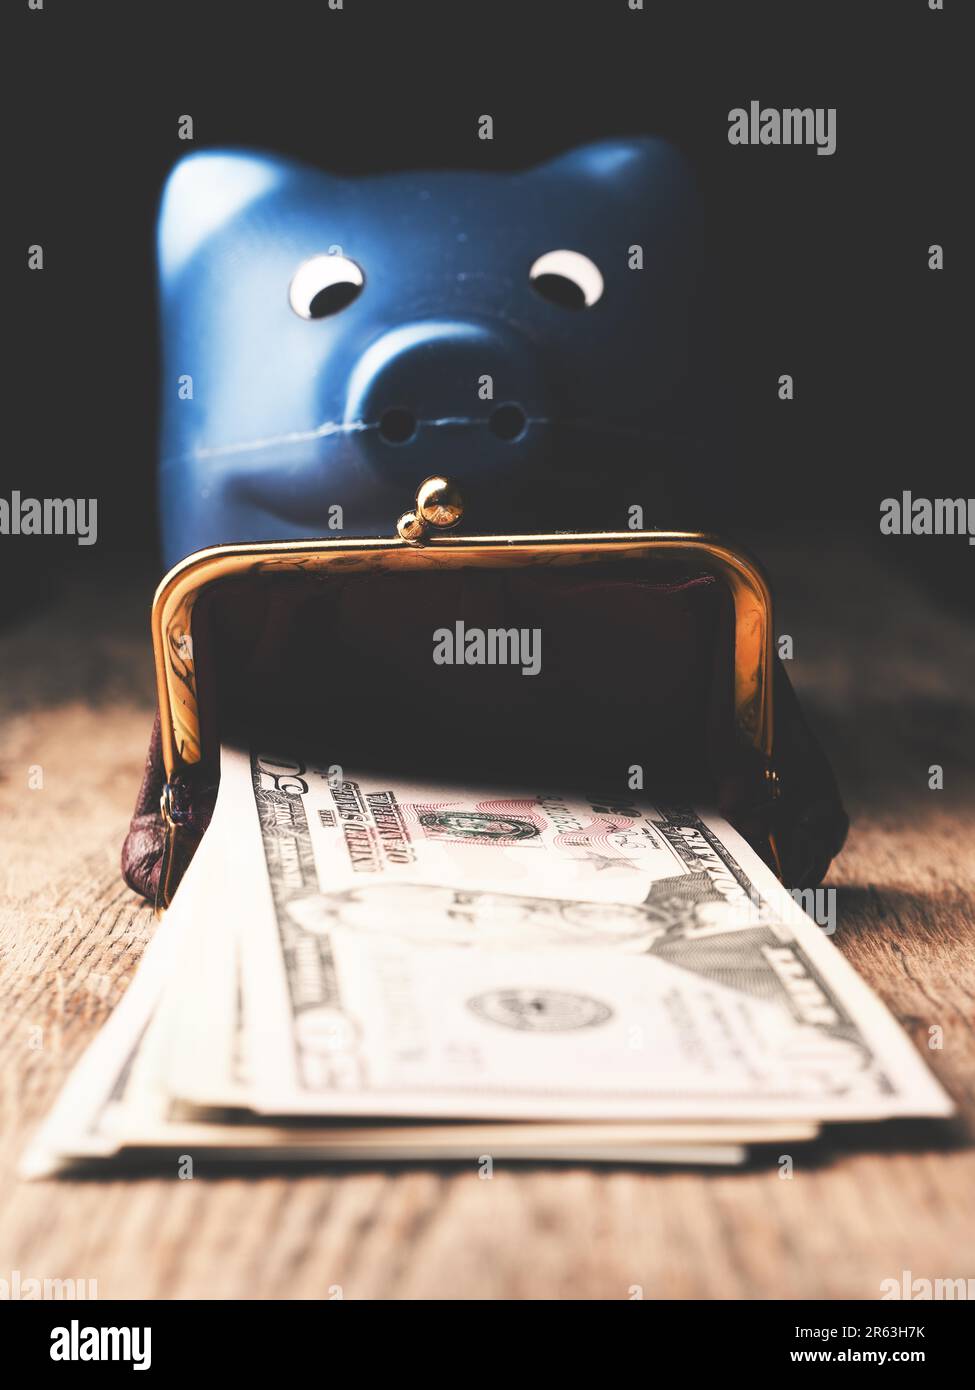 Dollar banknotes on a wooden table, abundance or wealth concept Stock Photo